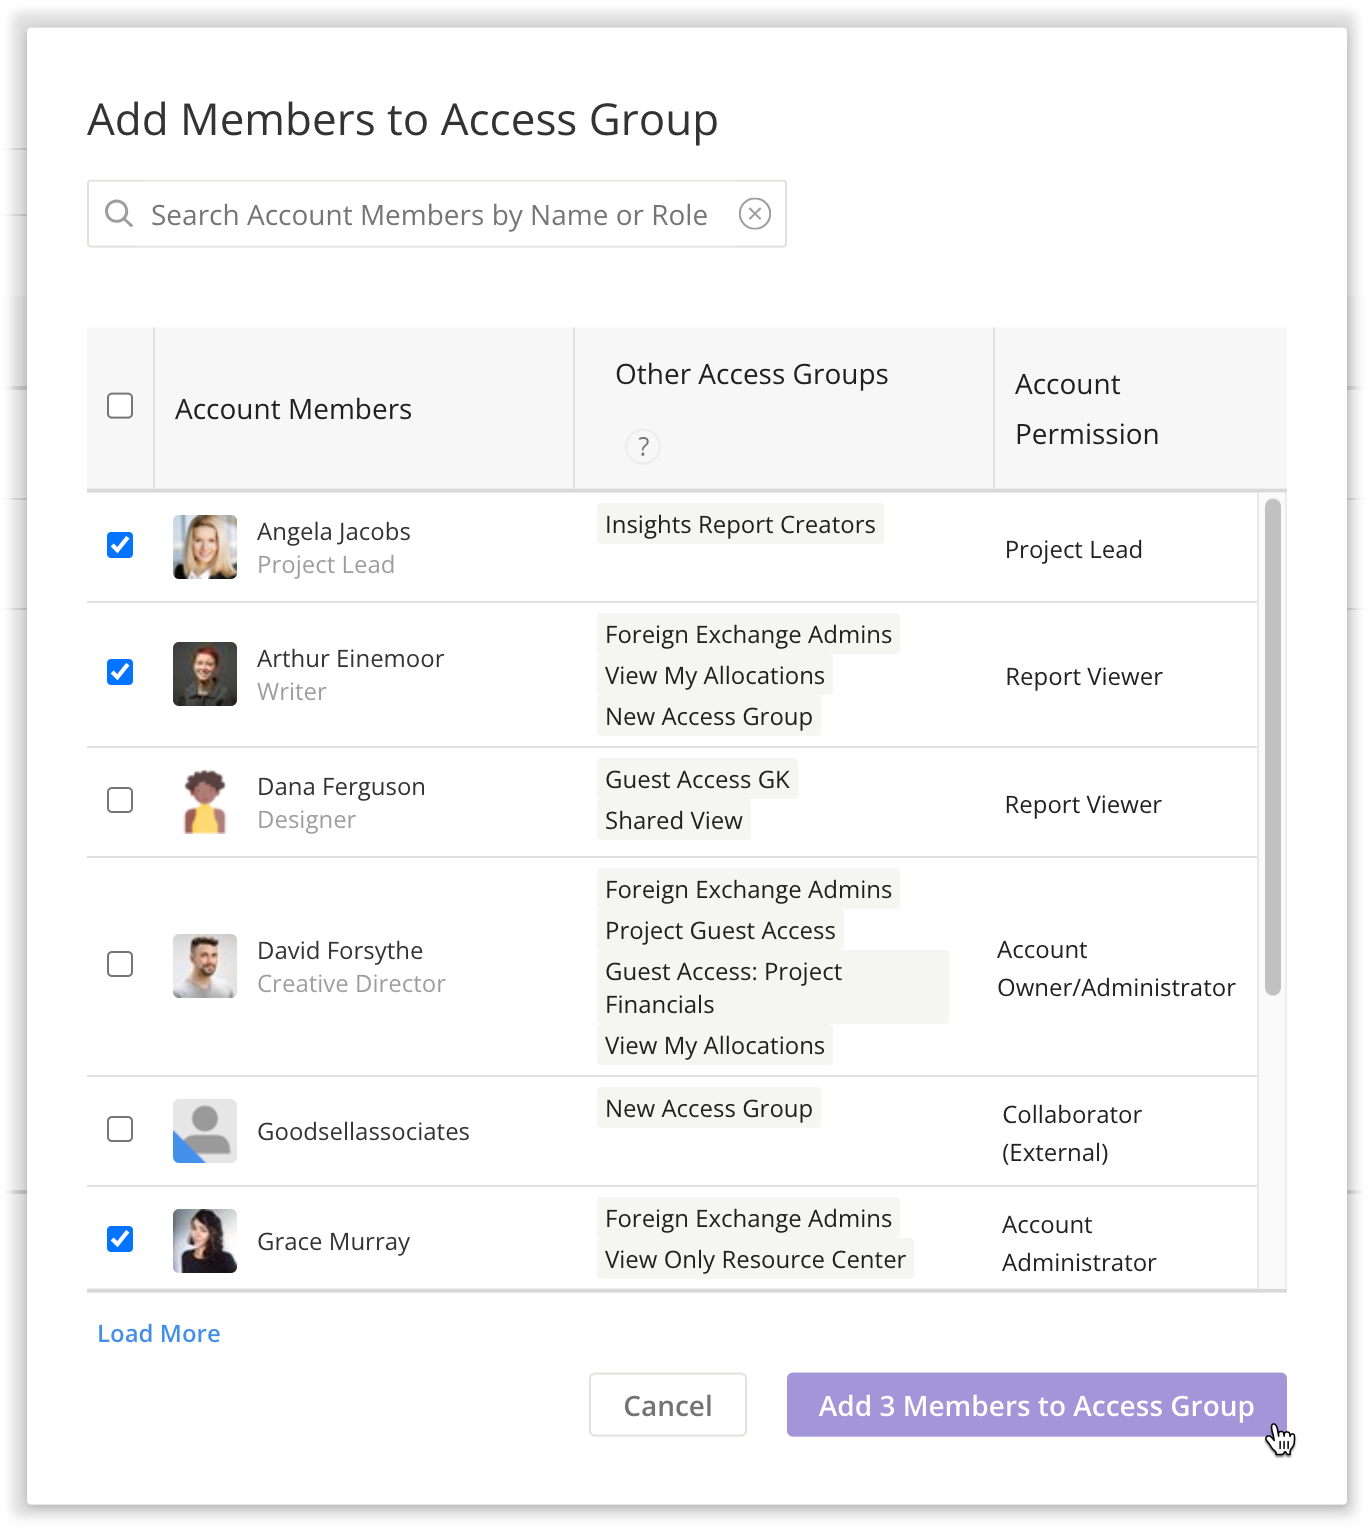 Add Members to Access Group modal.png